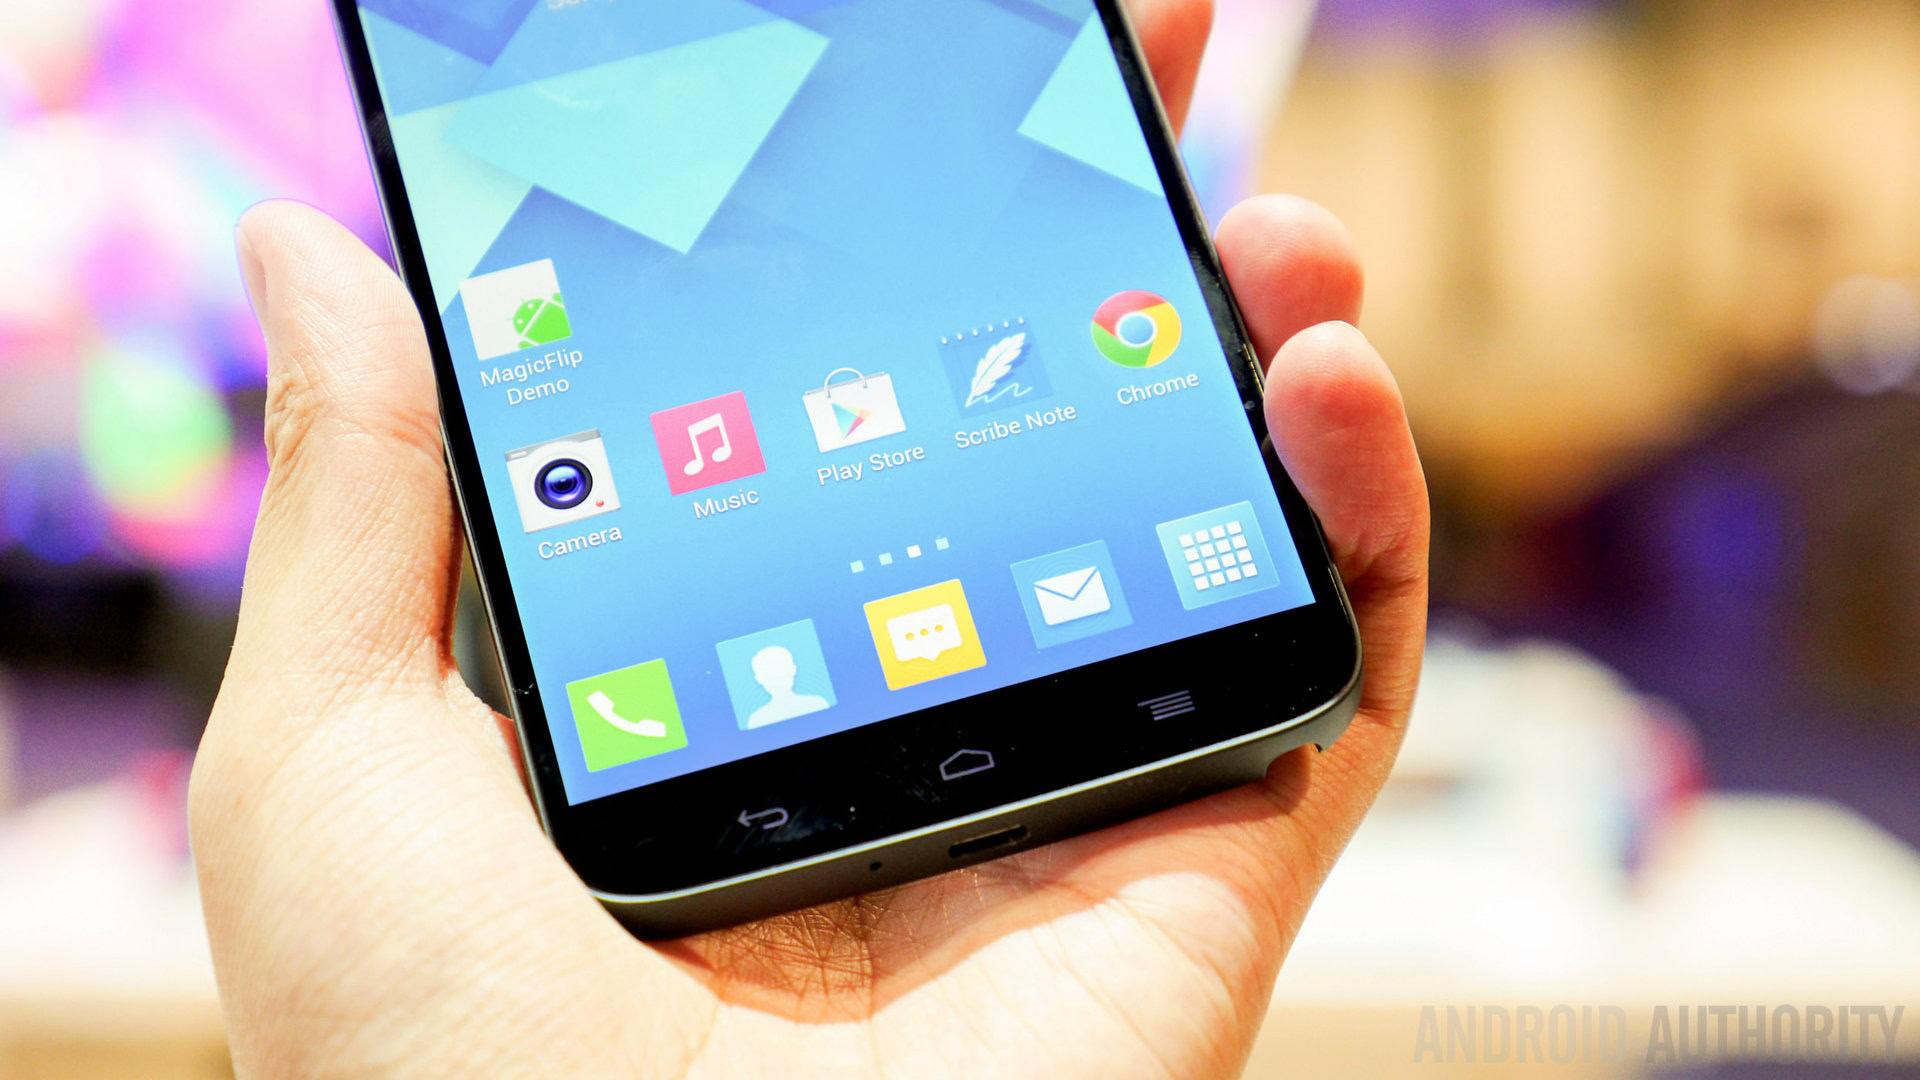 Alcatel Onetouch Hero Hands on 2000px